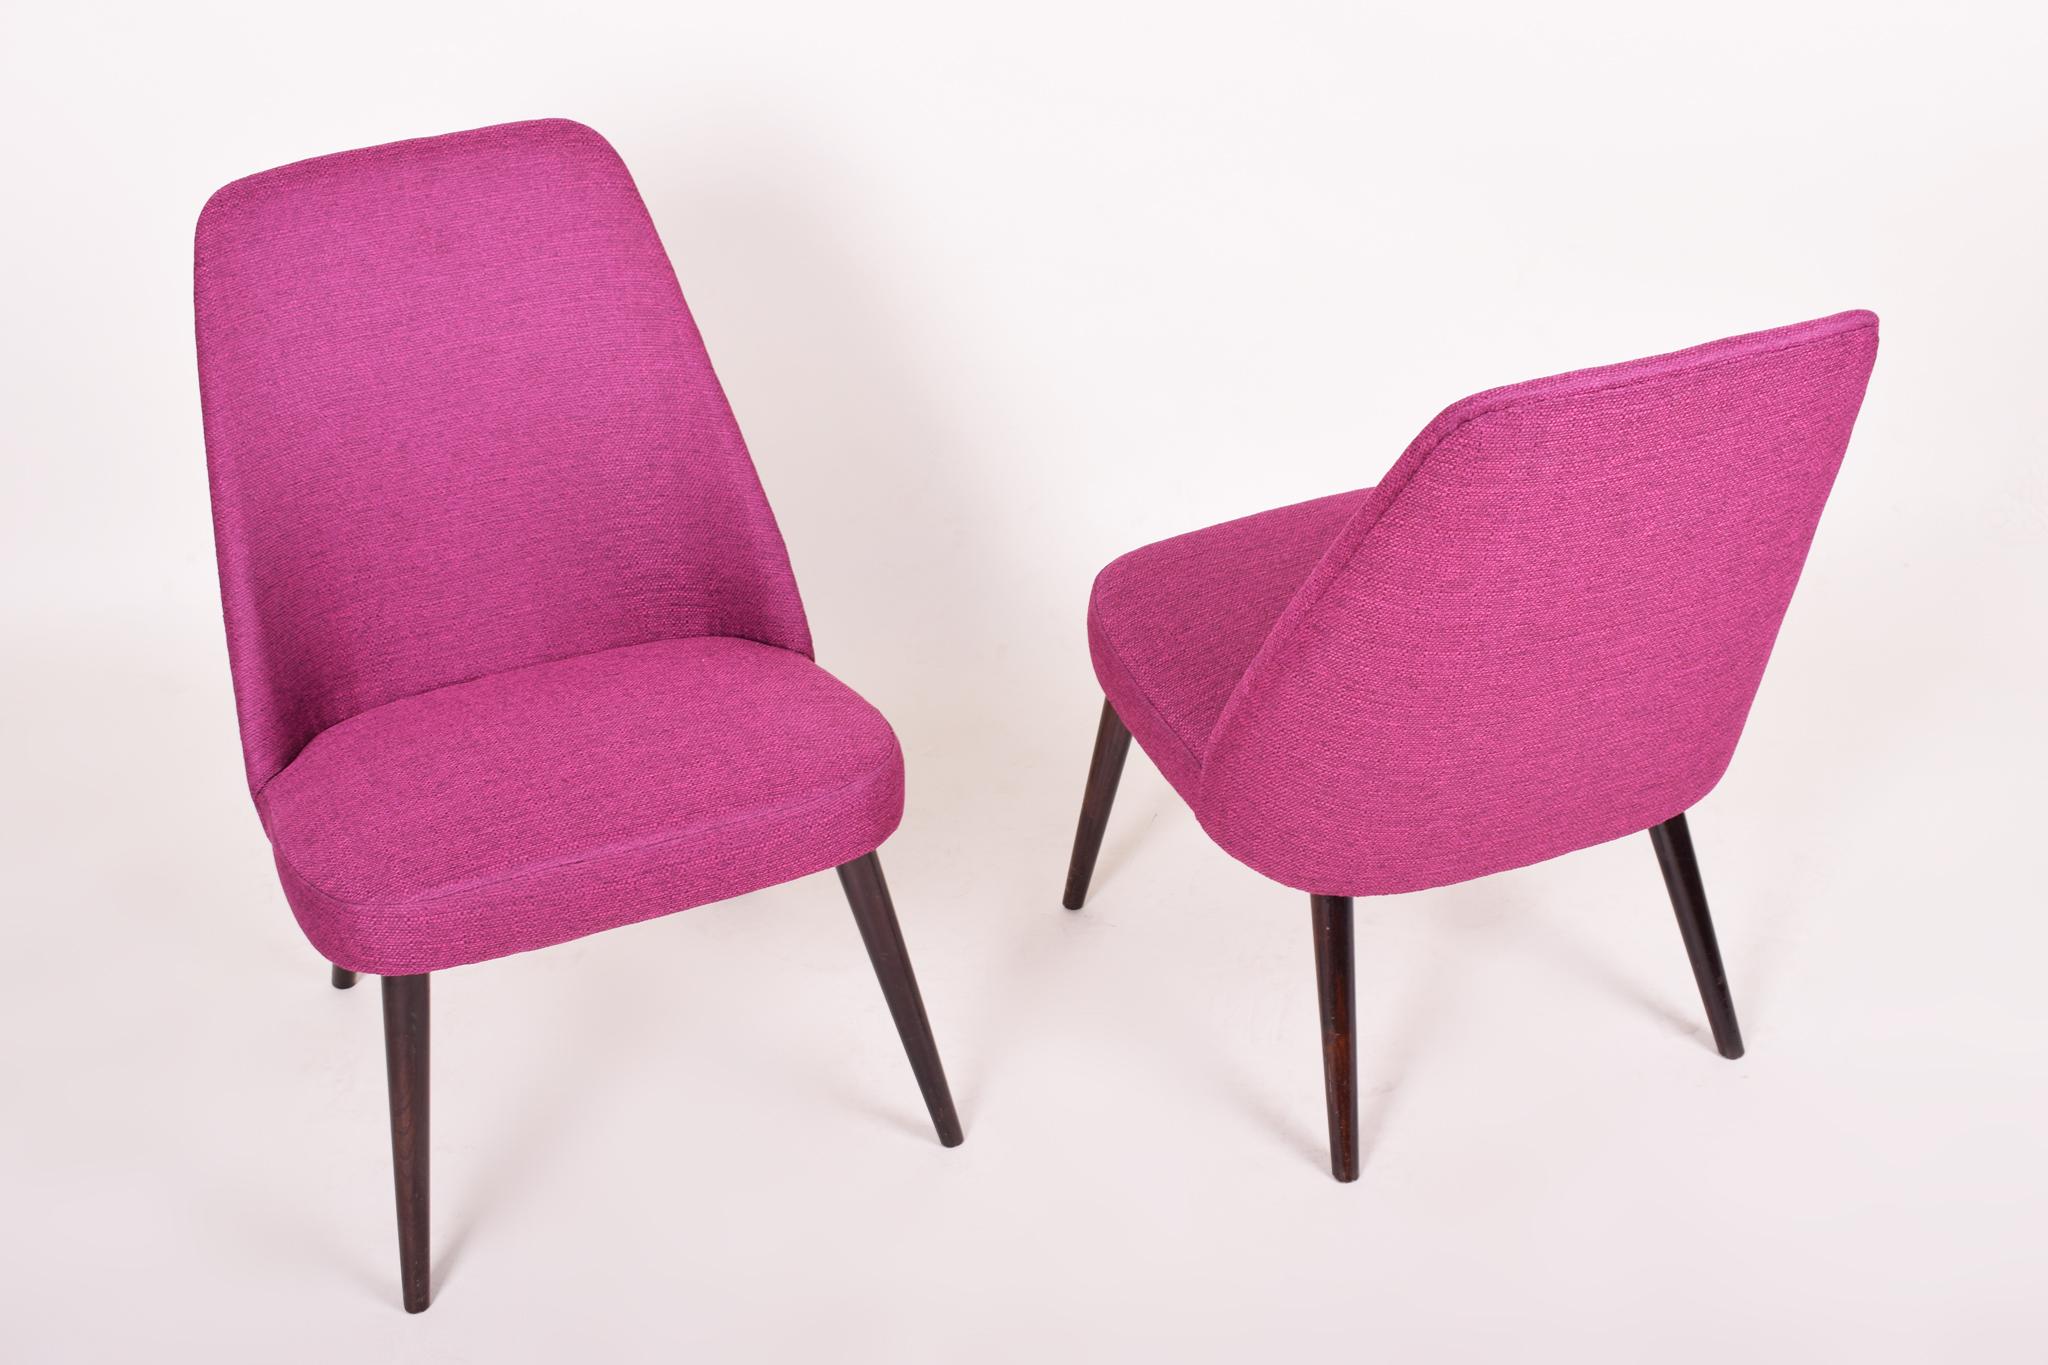 Fabric Restored Pair of Midcentury Chairs, Made in 1950s Czechia, Fully Restored For Sale